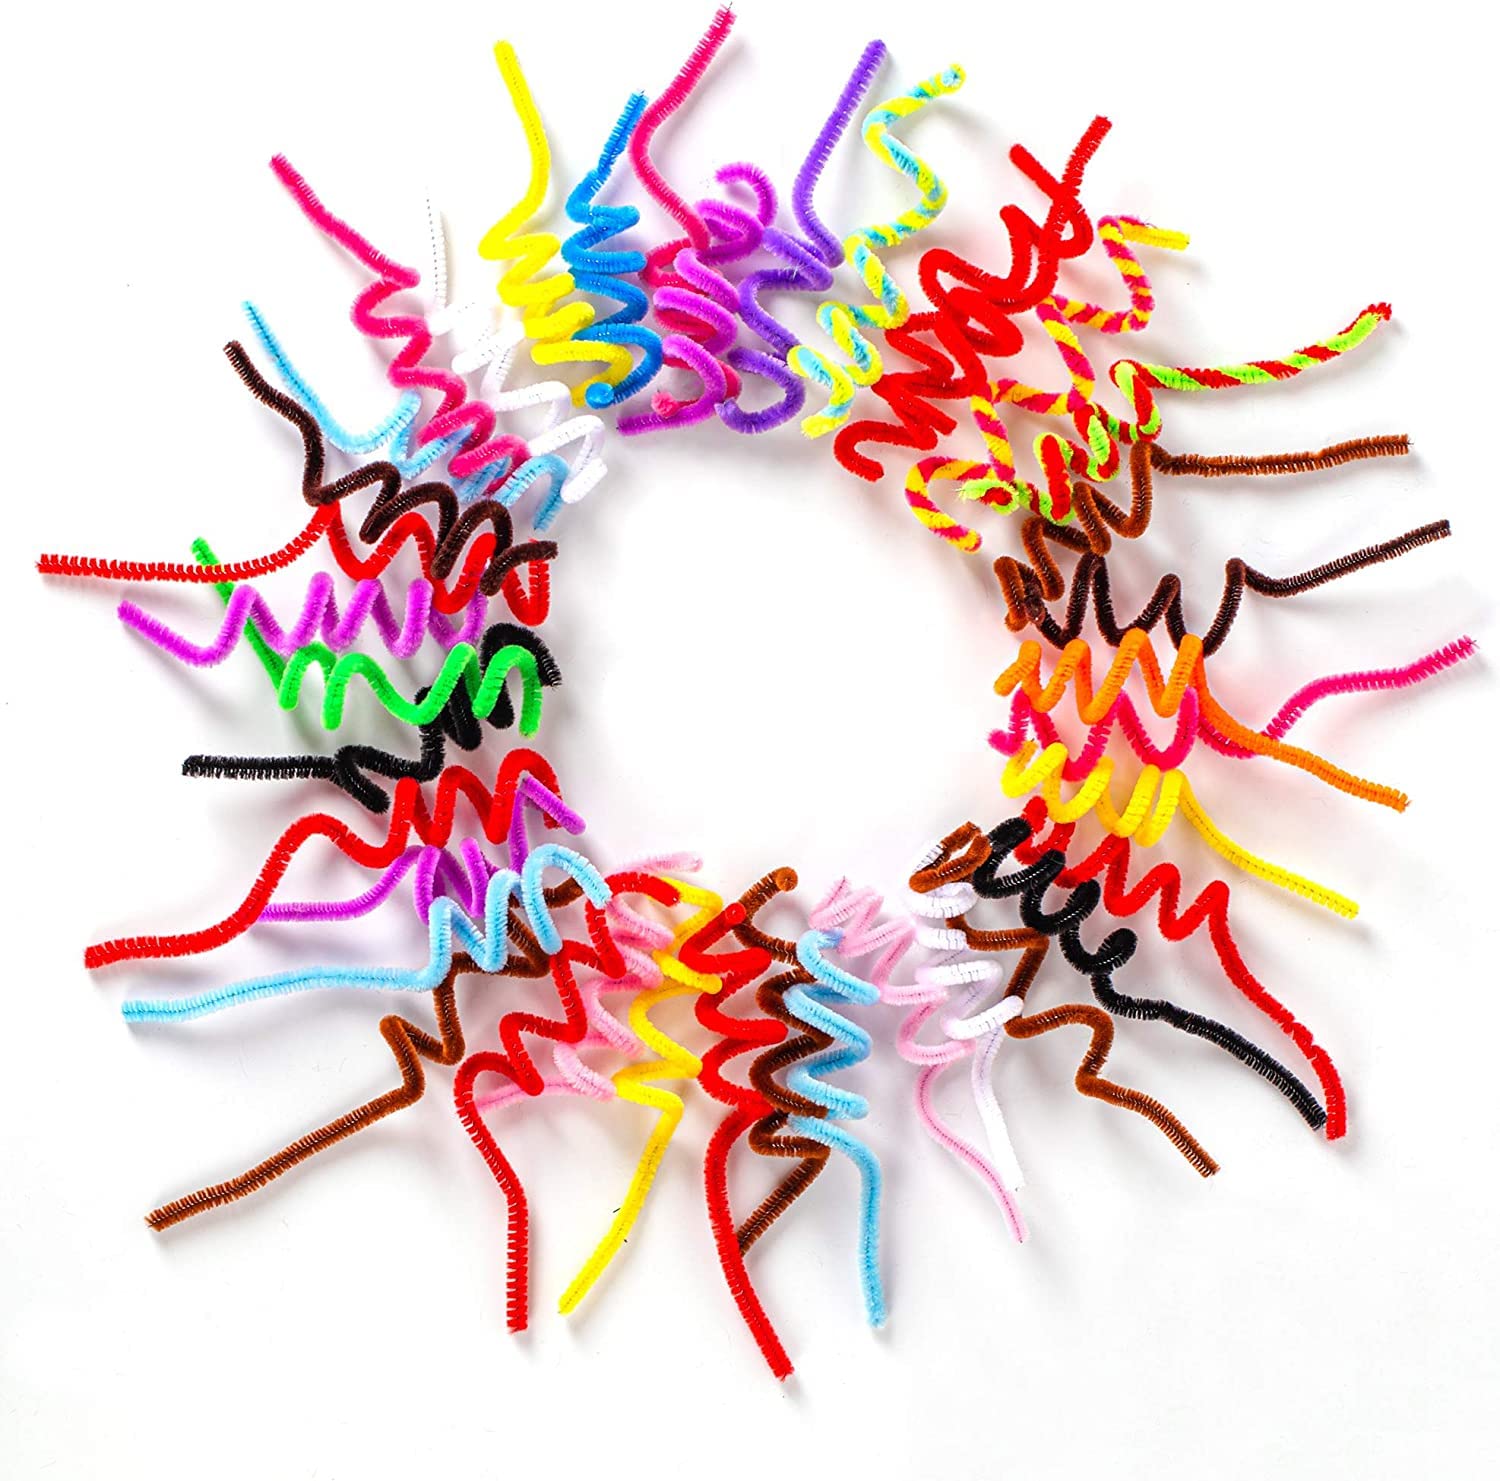 Craft Pipe Cleaners for Kids – 300 Chenille Stems in 20 Vibrant Colors Measure 6mm x 12 Inches Each – Bend, Twist and Connect to Create Fun, Fuzzy Ornaments, Decorations, Animals and Flowers